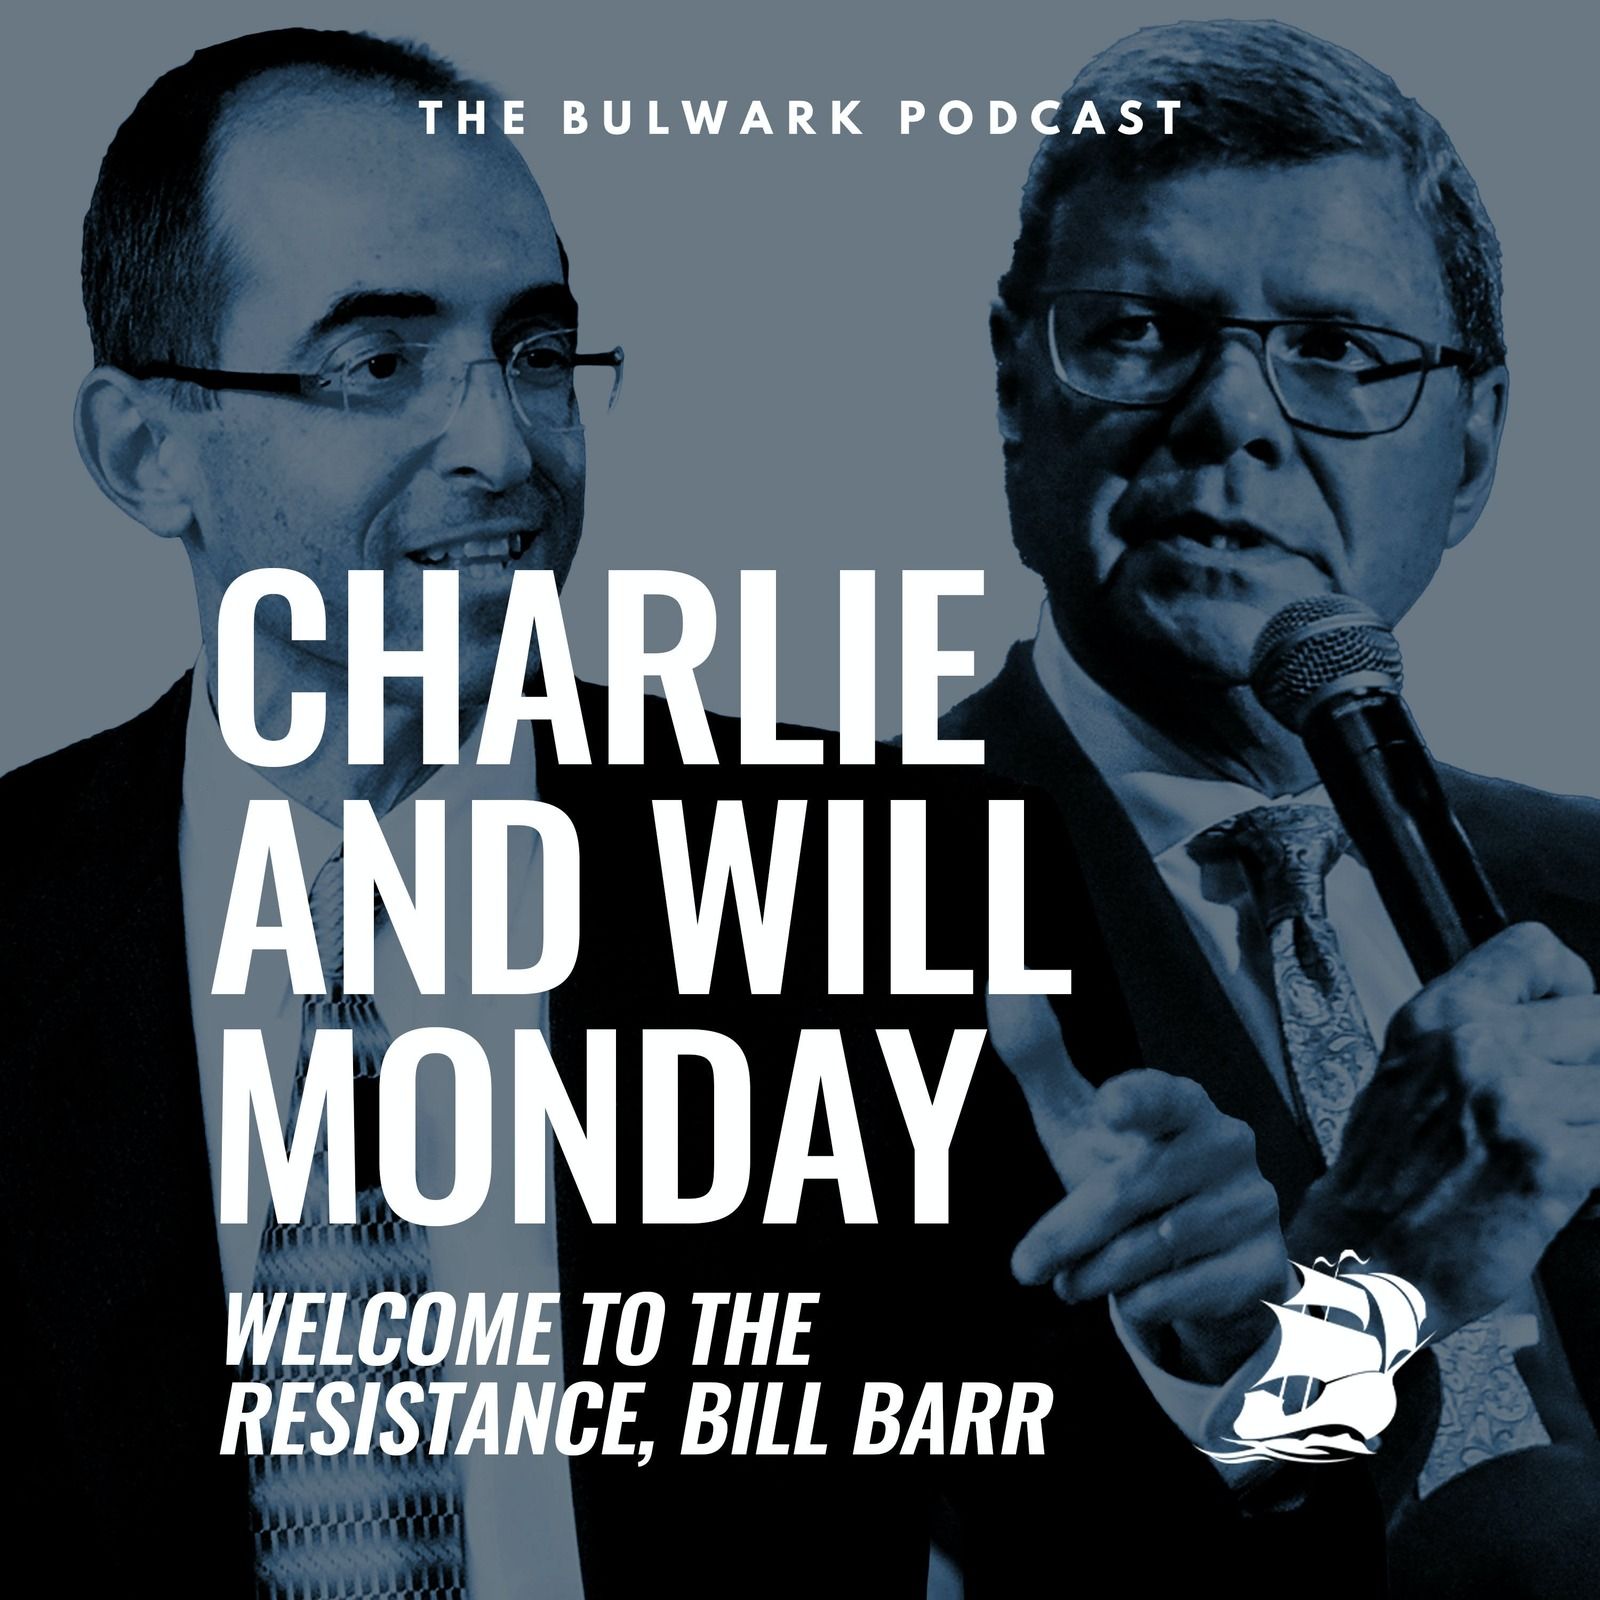 Will Saletan: Welcome to the Resistance, Bill Barr